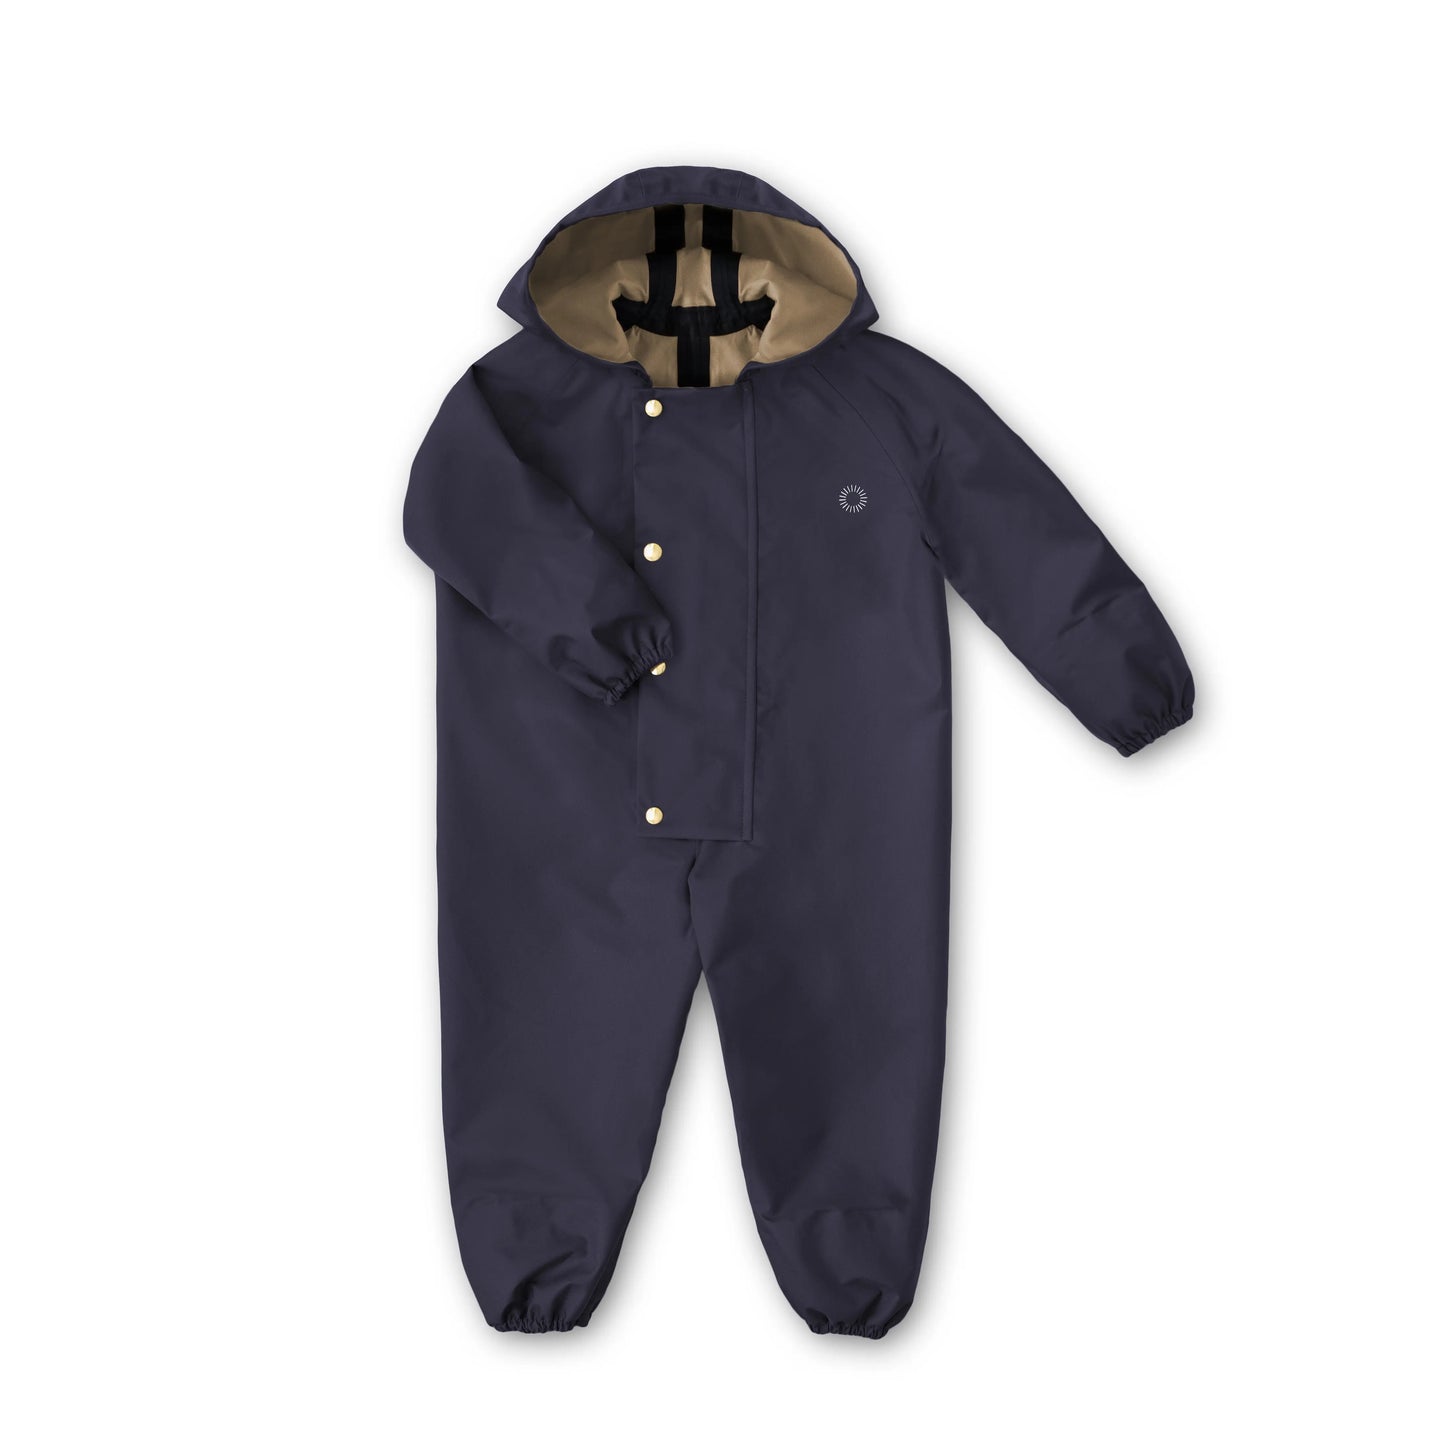 Providing head to ankle coverage, the Onesie is designed for little explorers. The roomy, attached hood allows for a hat during the colder seasons and air circulation when its warm. Soft elastic in the wrists and ankle cuffs help to keep things snug and the front flap provides additional coverage with brass snaps. This is an adorable option for parents who want their little ones to enjoy the natural world, whatever the weather.